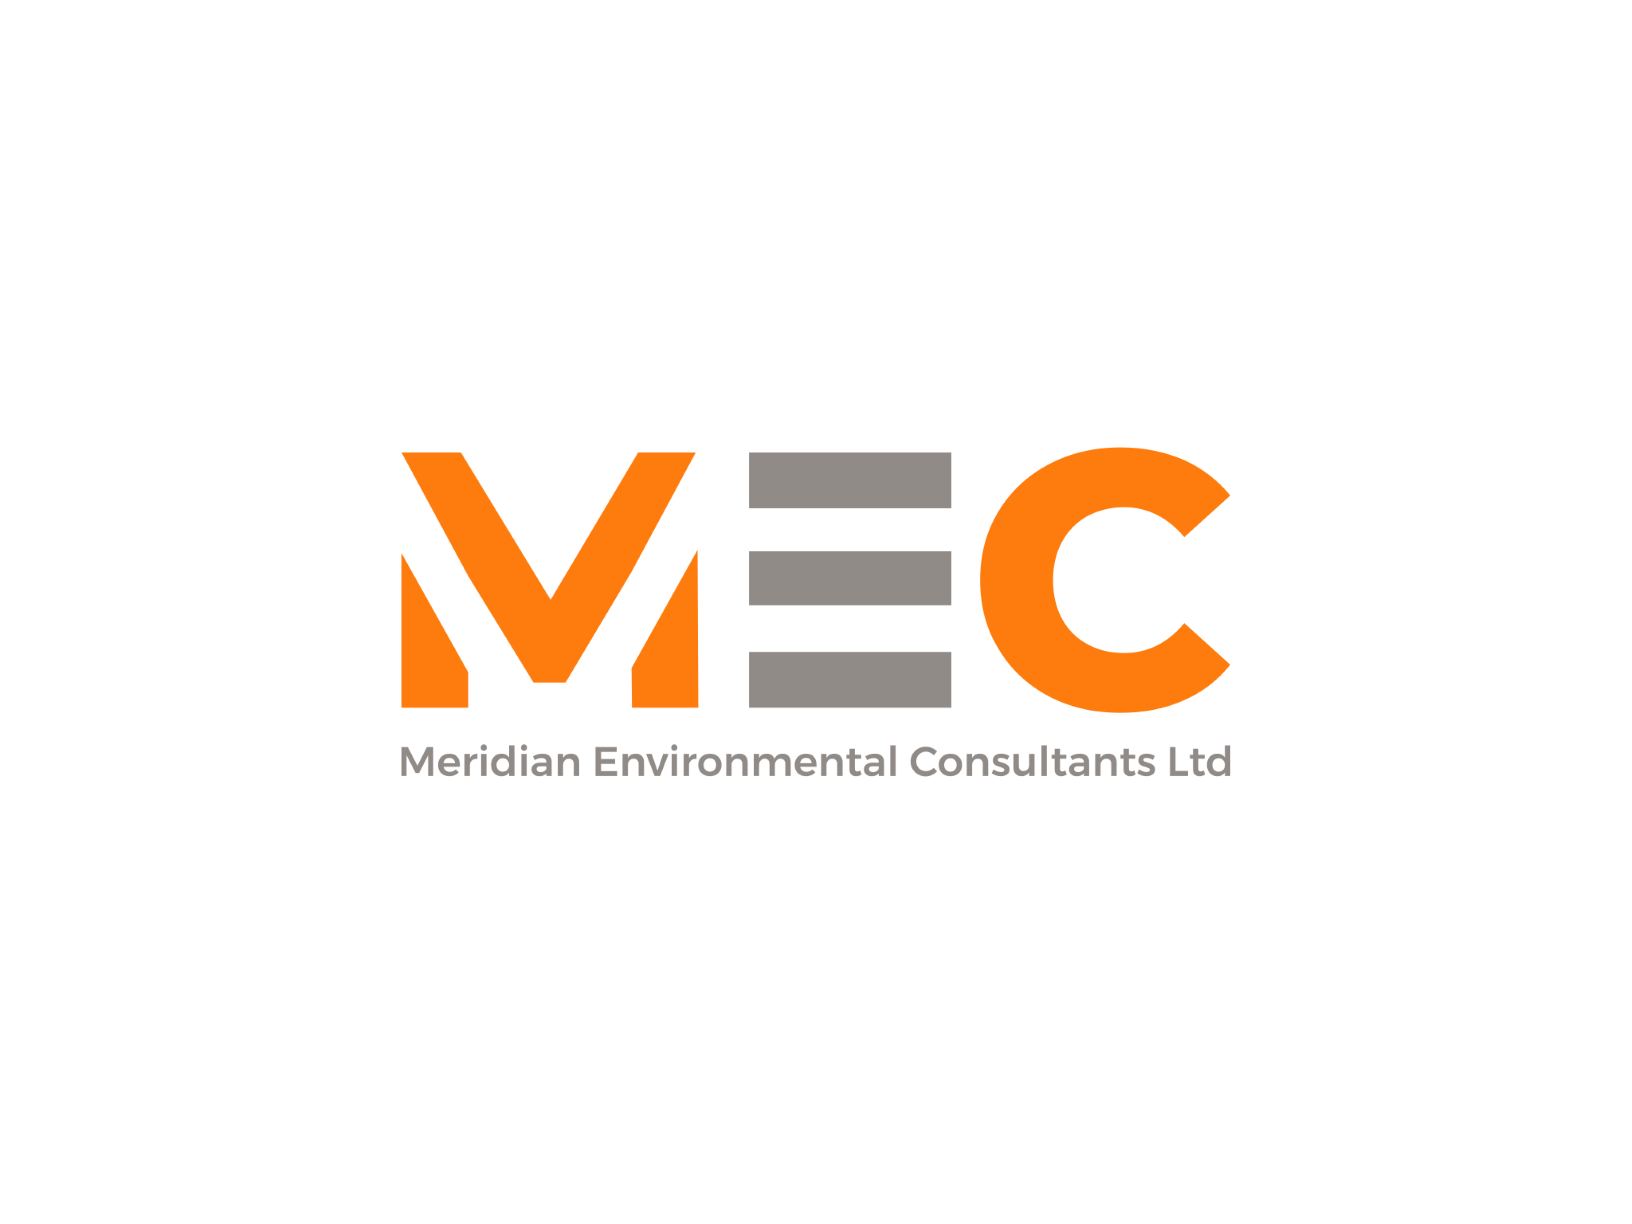 Logo of Meridian Environmental Consultants Ltd (MEC) Health And Safety Products In Harrogate, North Yorkshire